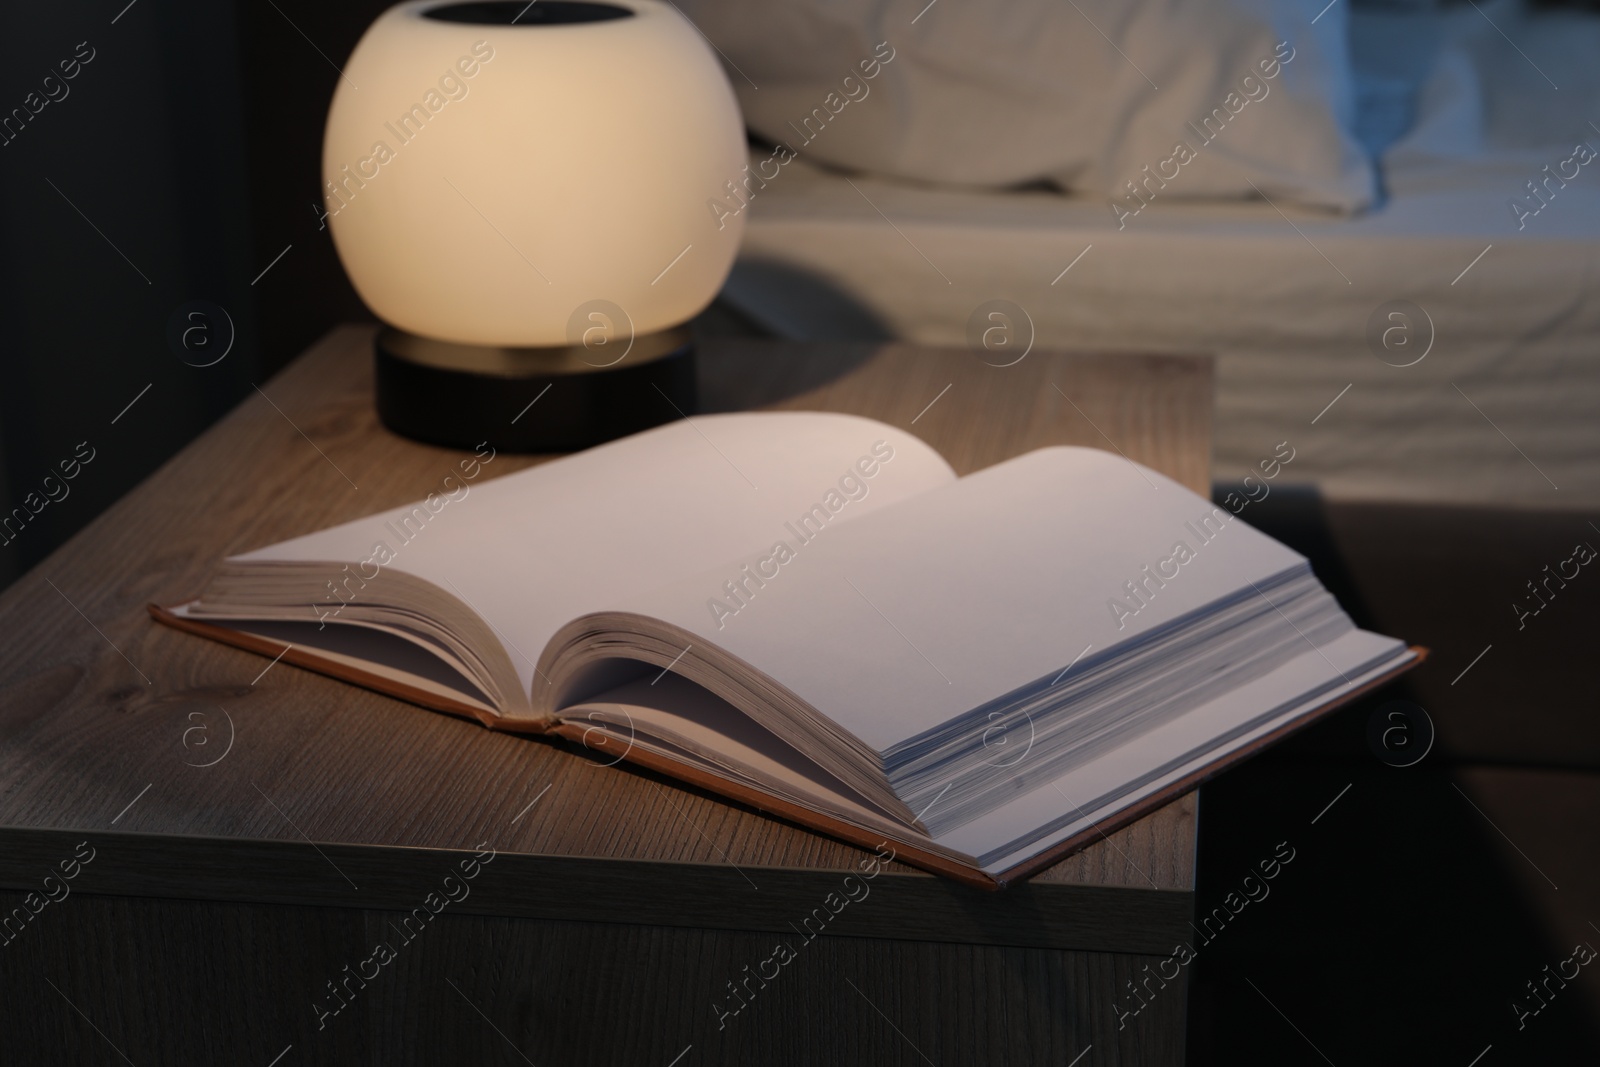 Photo of Stylish nightlight and book on bedside table near bed indoors